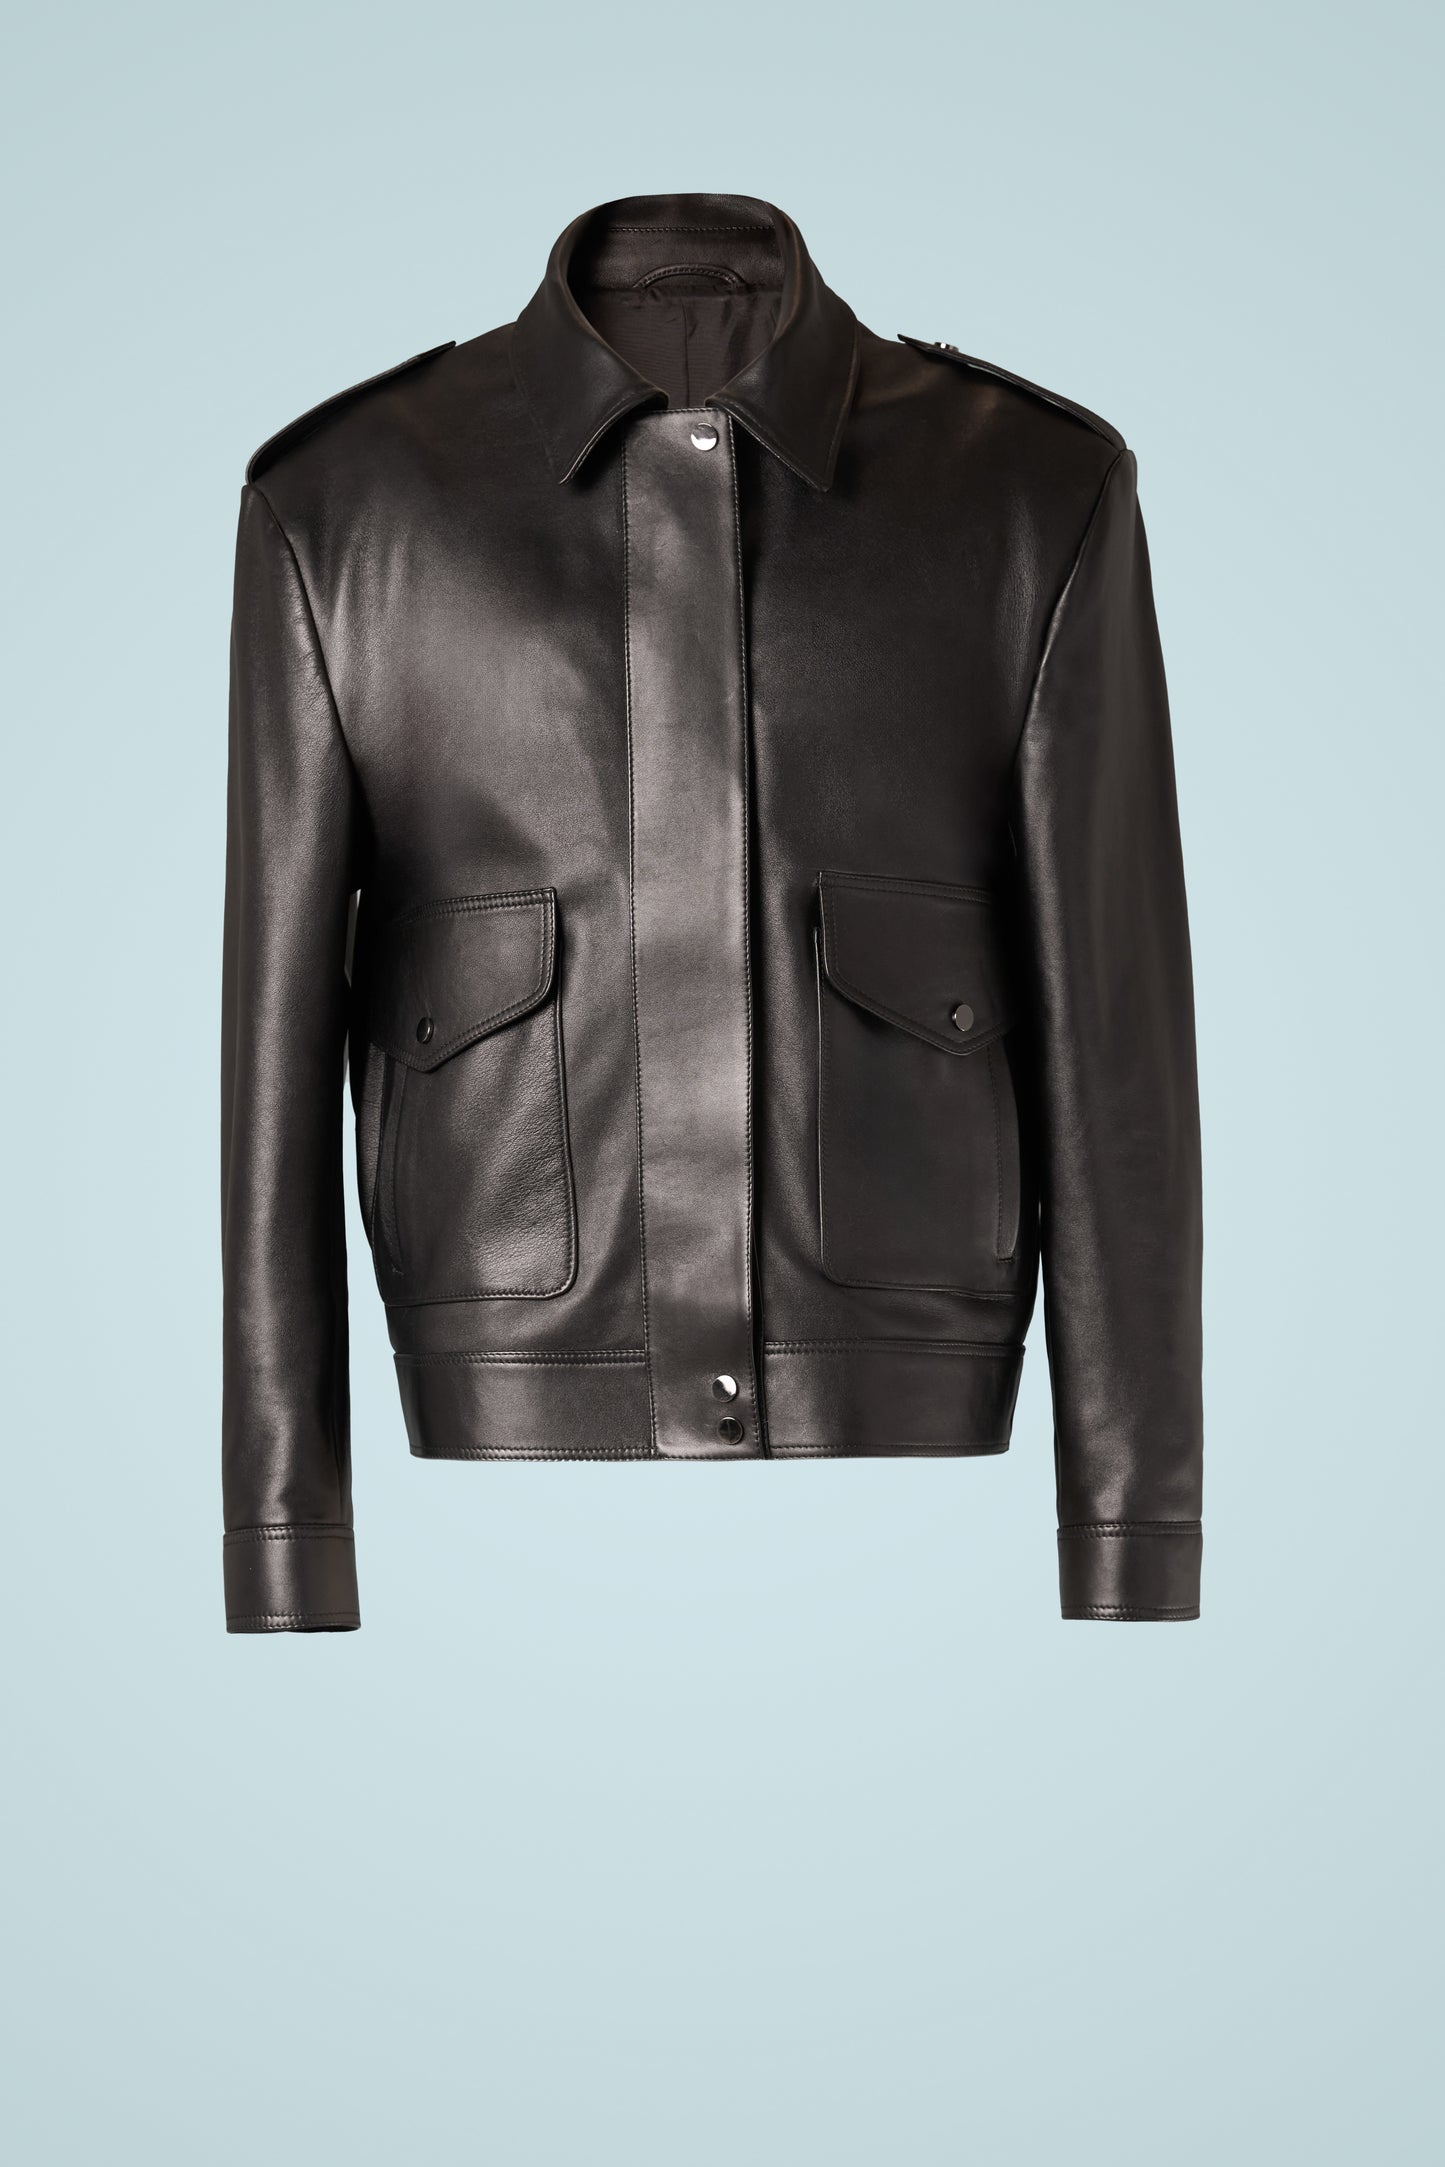 The Motion Edit Leather Jacket